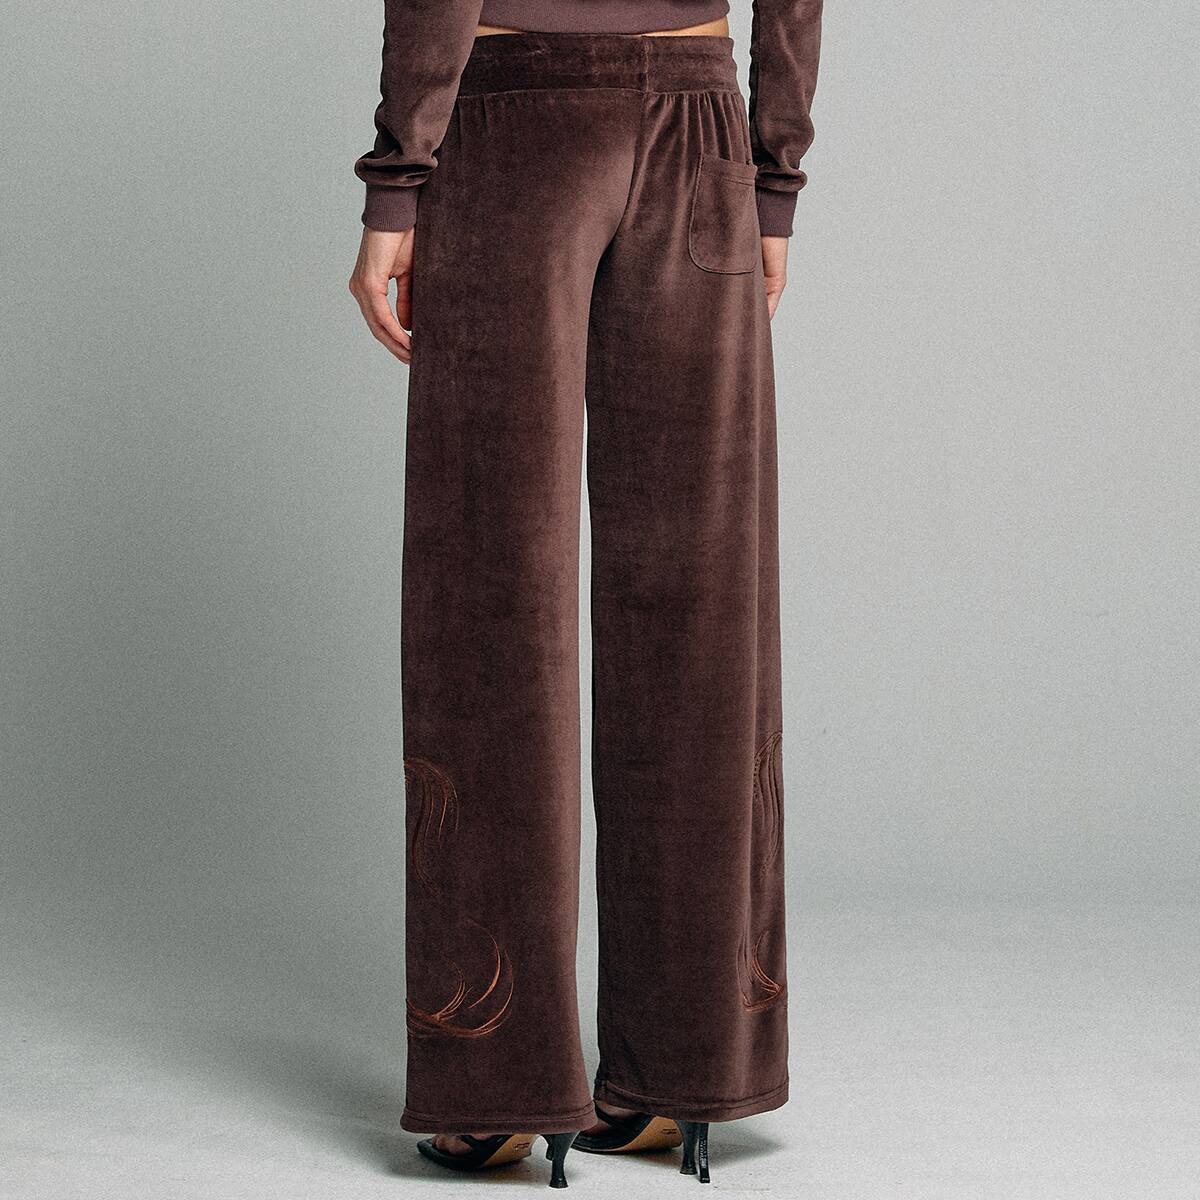 SCULPTOR Velour Bootcut pants BROWN 22FA-I